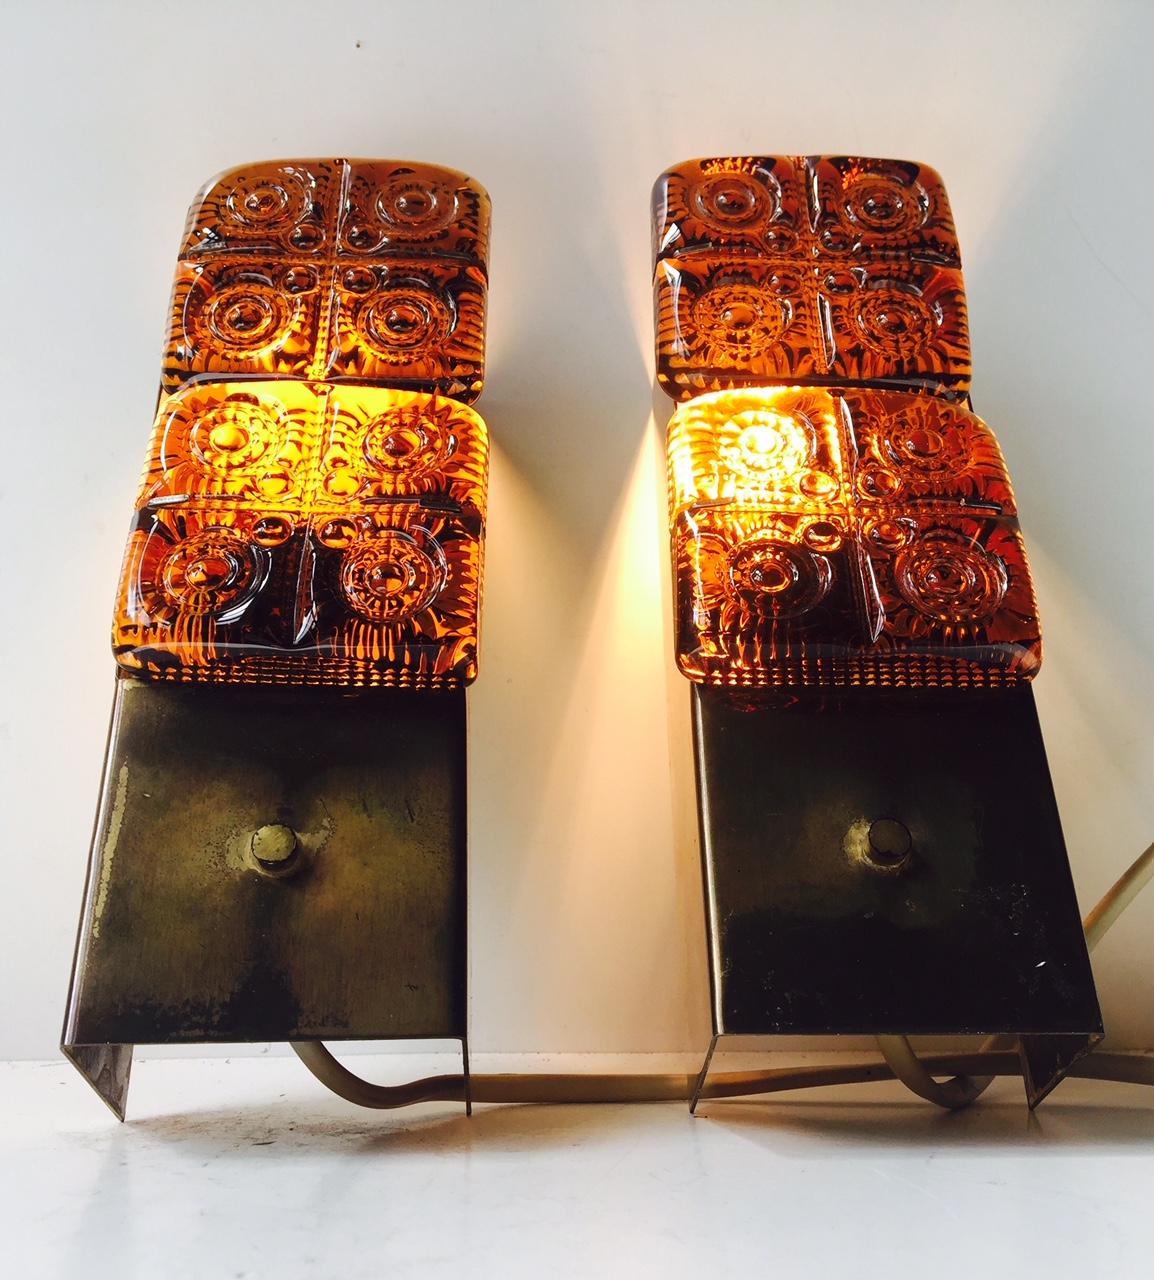 These wall lights from Austrian HAGS feature a solid brass construction with a rich rainbow-colored patina and thick amber glass inserts. Both stamped by the manufacturer.